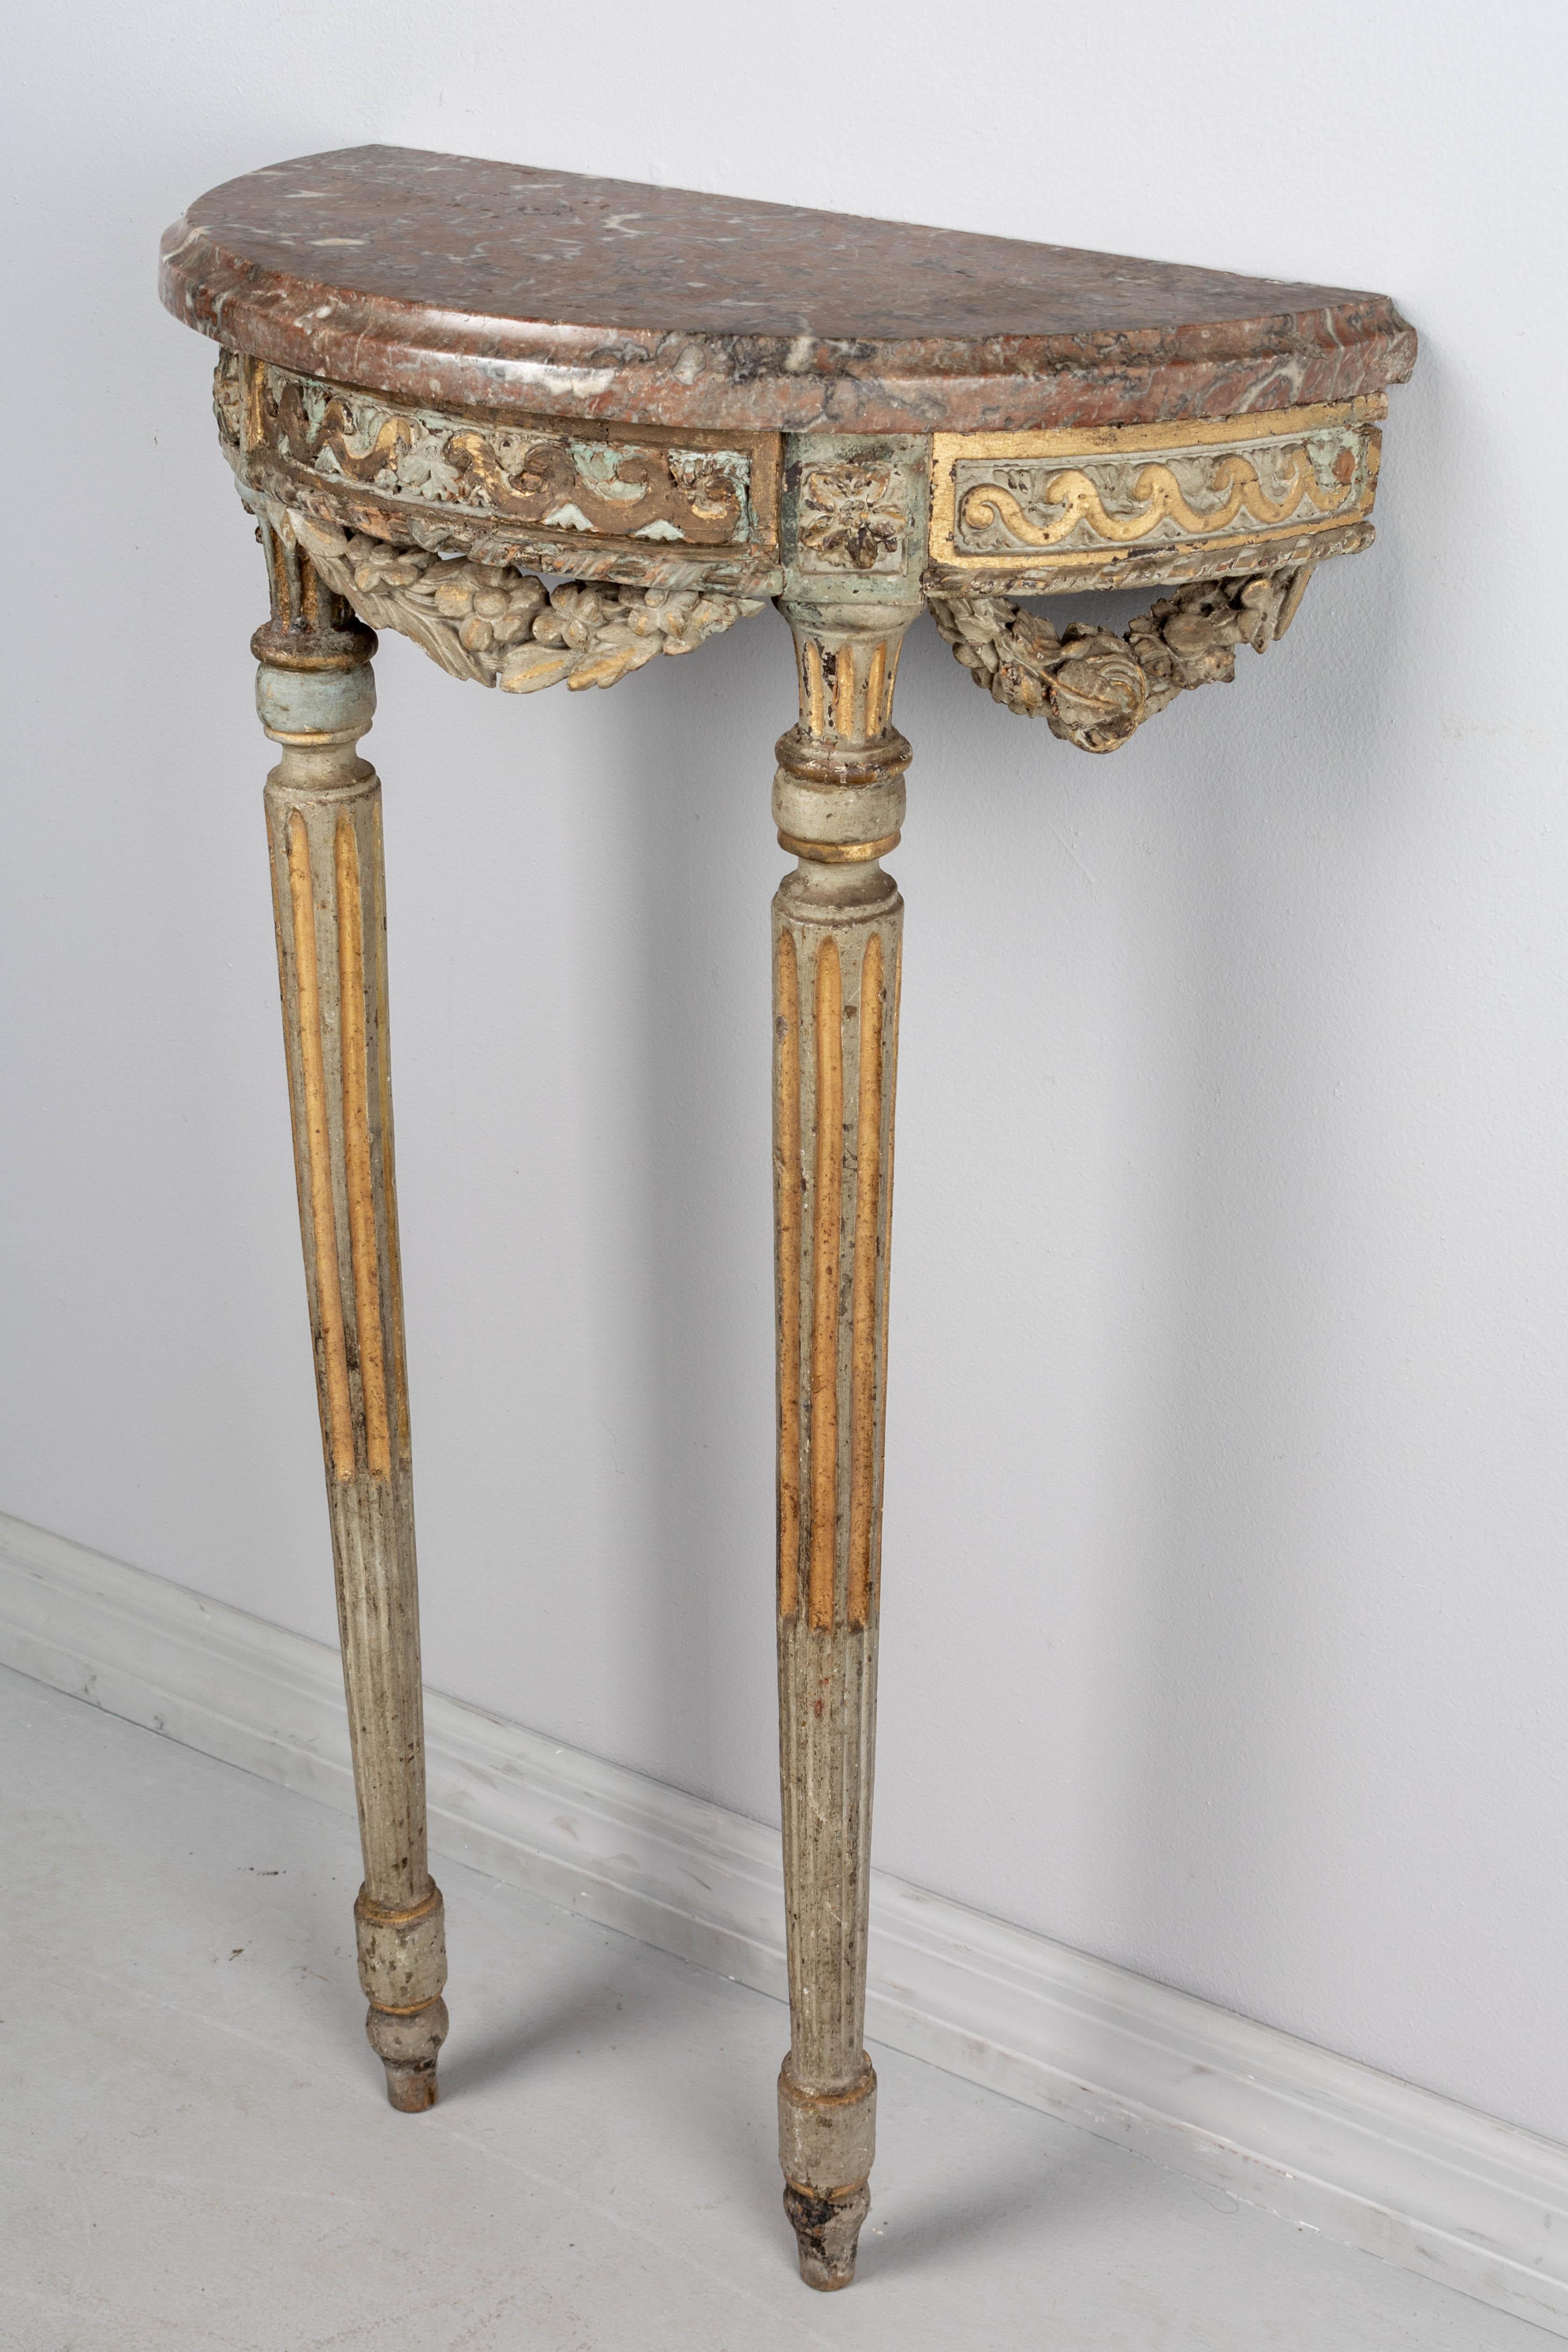 Hand-Carved 18th Century Louis XVI Style Painted Demilune Console